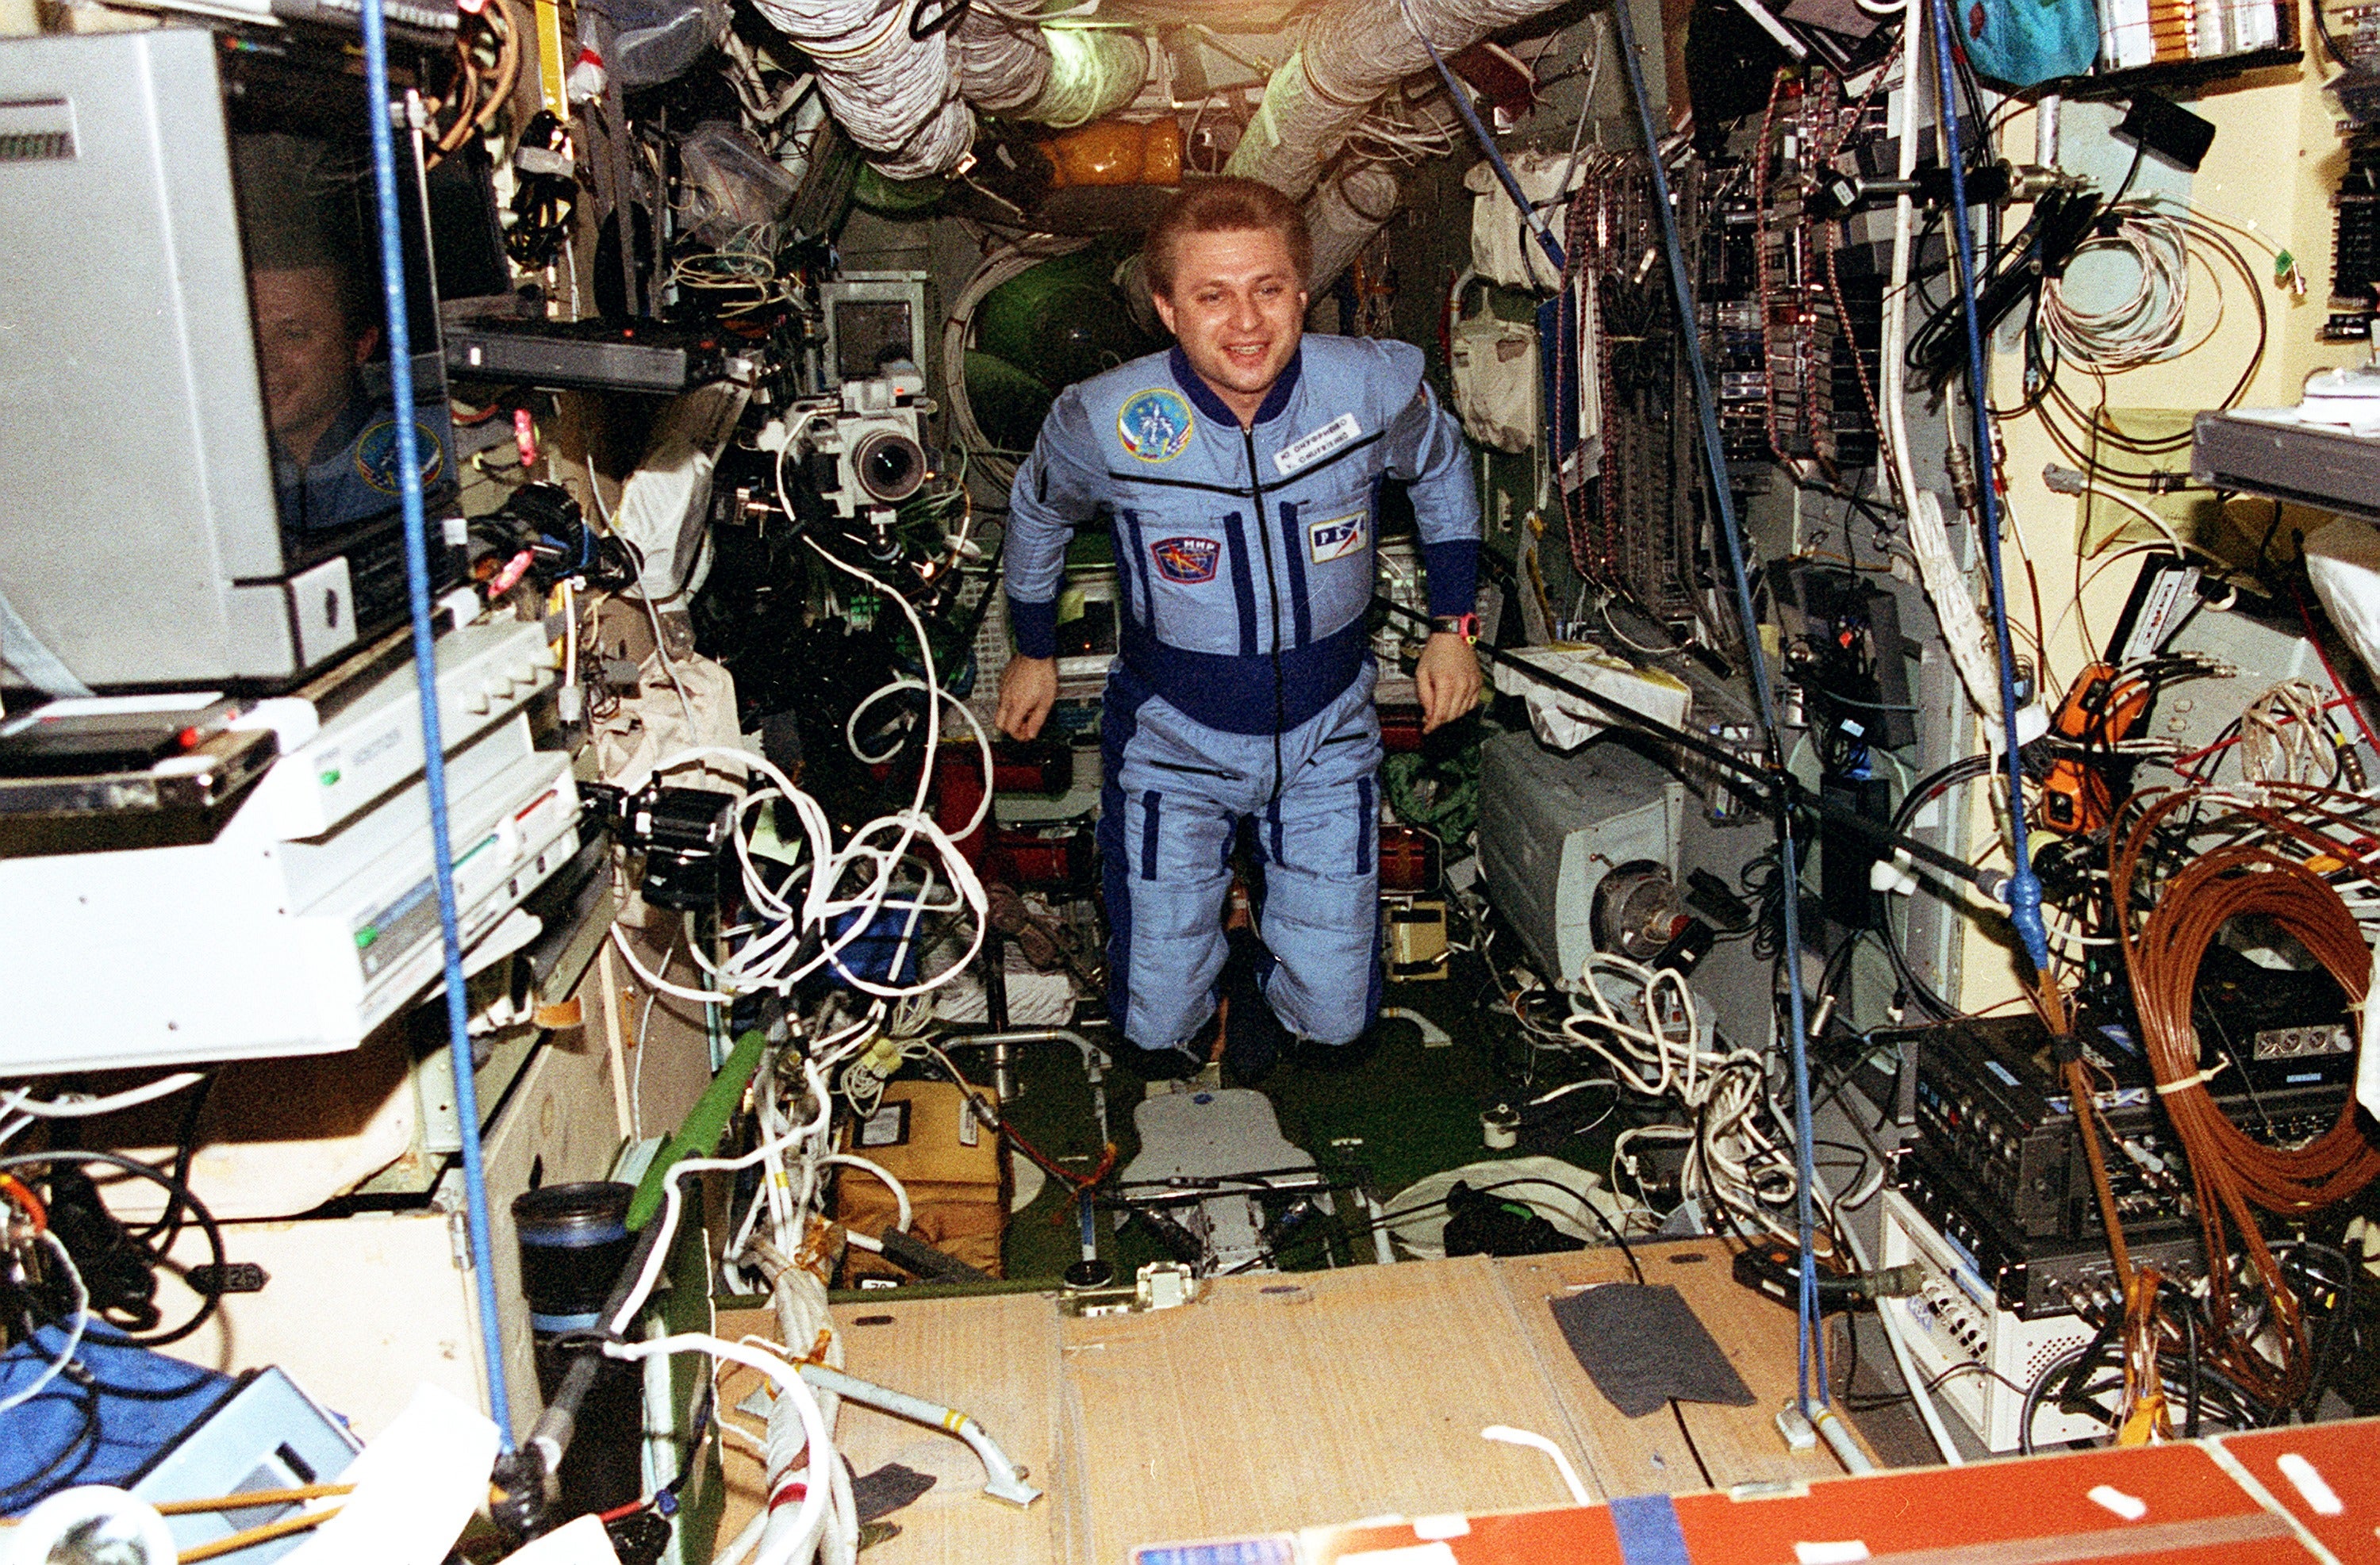 Inside the Mir Space Station